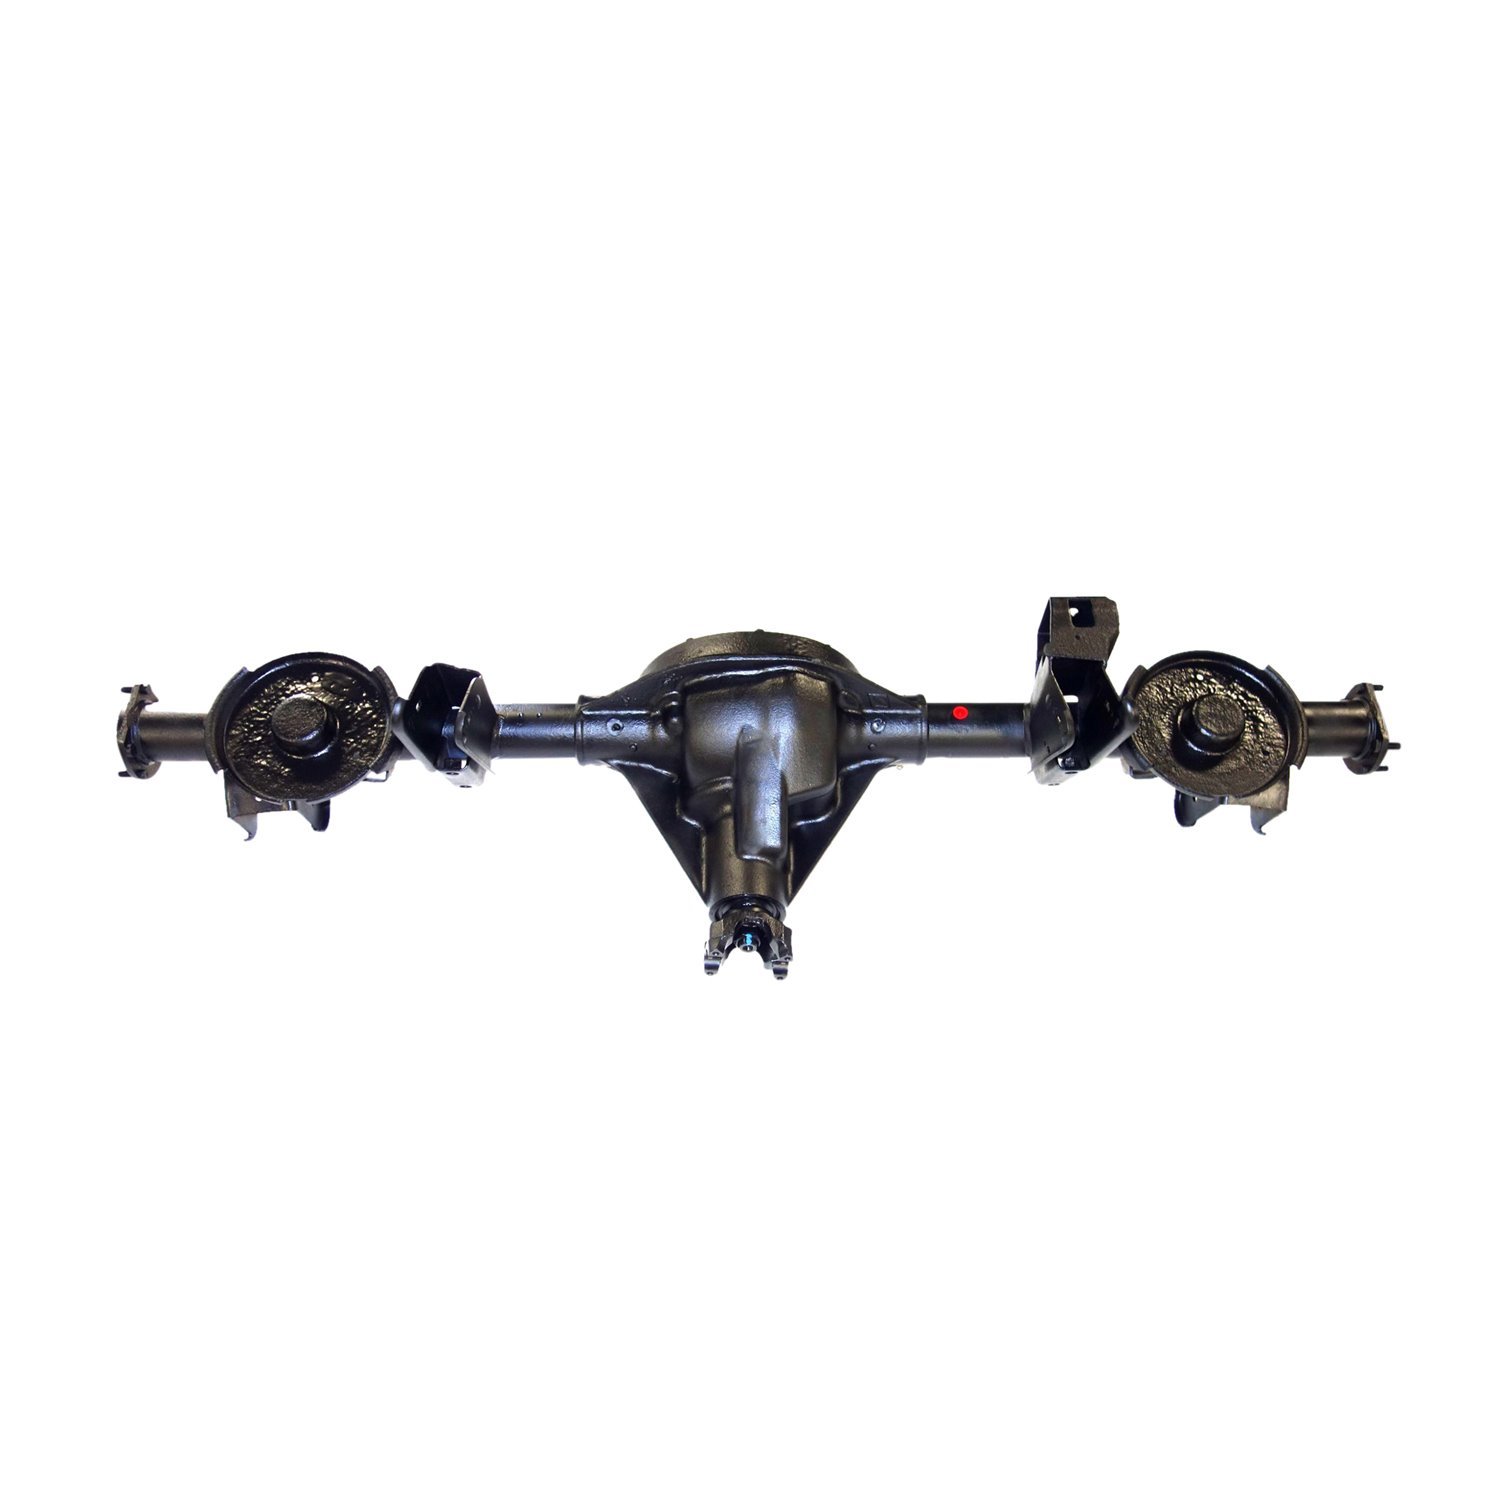 Remanufactured Complete Axle Assembly for Dana 35 97-02 Jeep Wrangler 4.11 Ratio with ABS